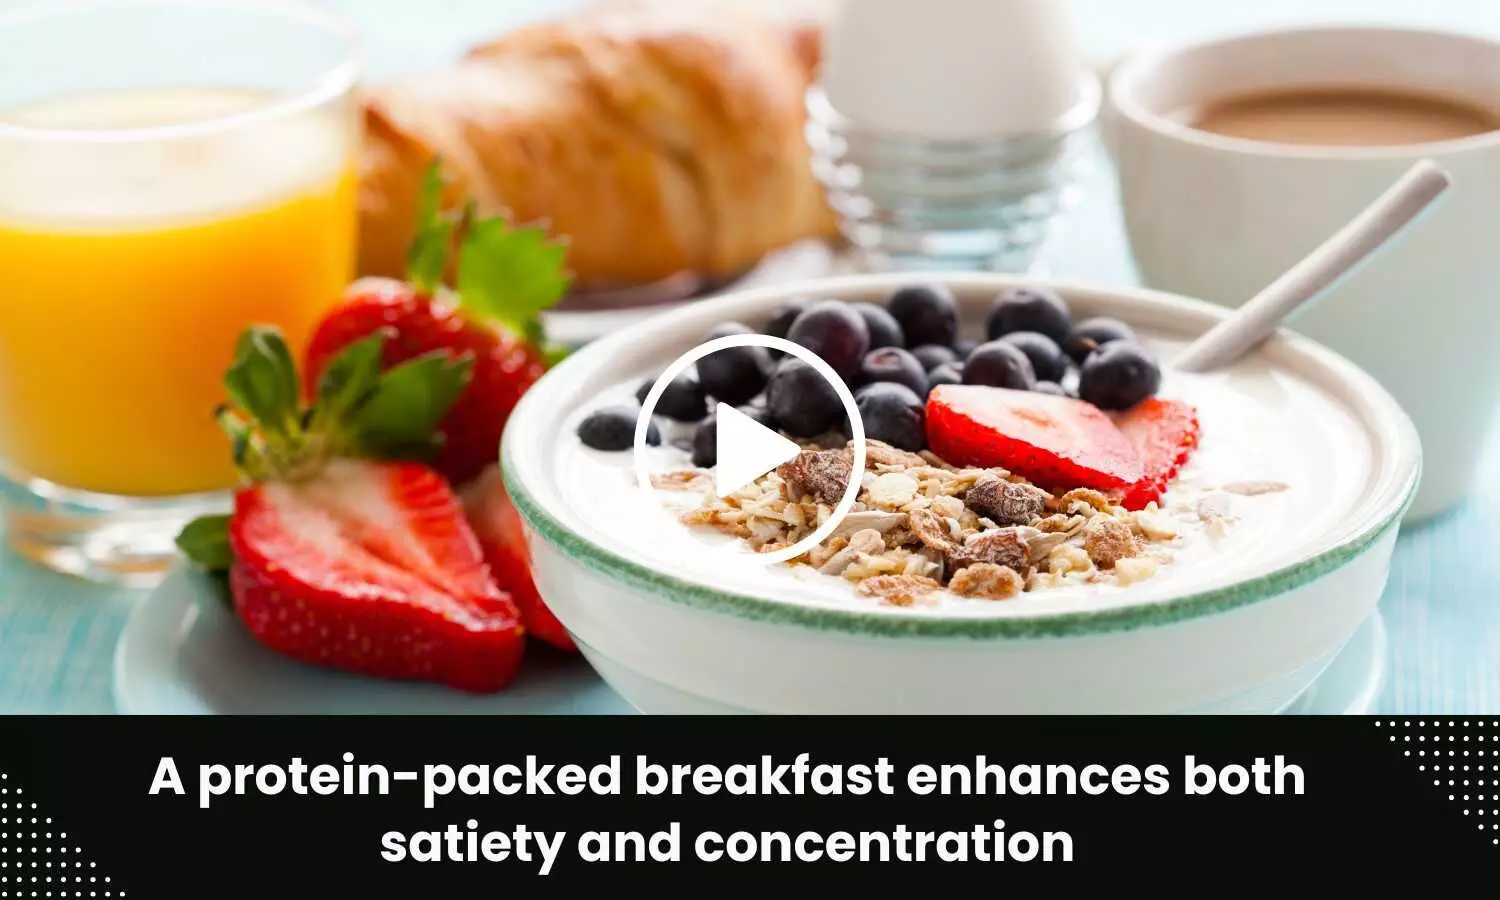 A protein-packed breakfast enhances both satiety and concentration